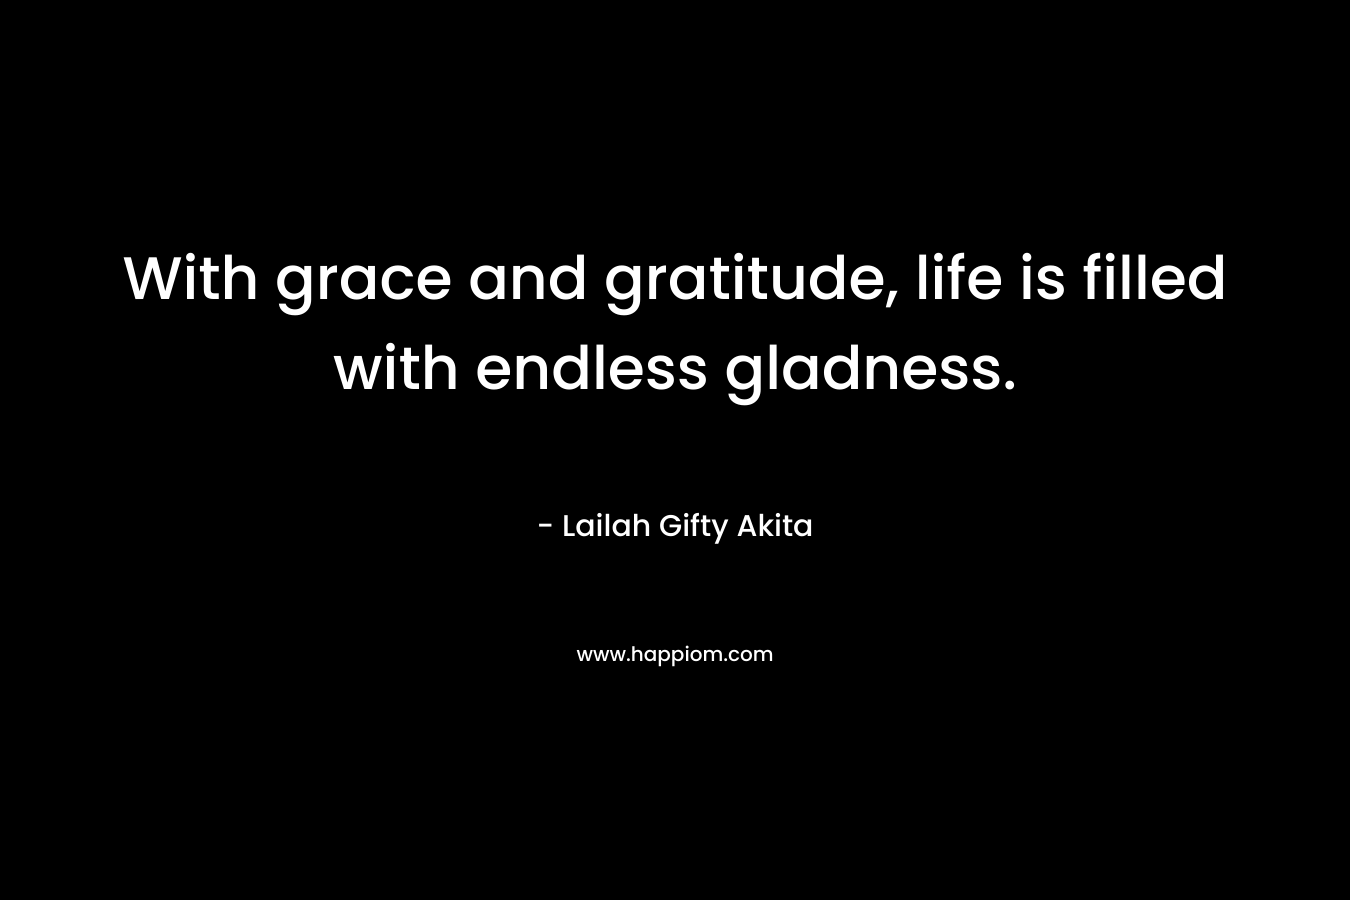 With grace and gratitude, life is filled with endless gladness.